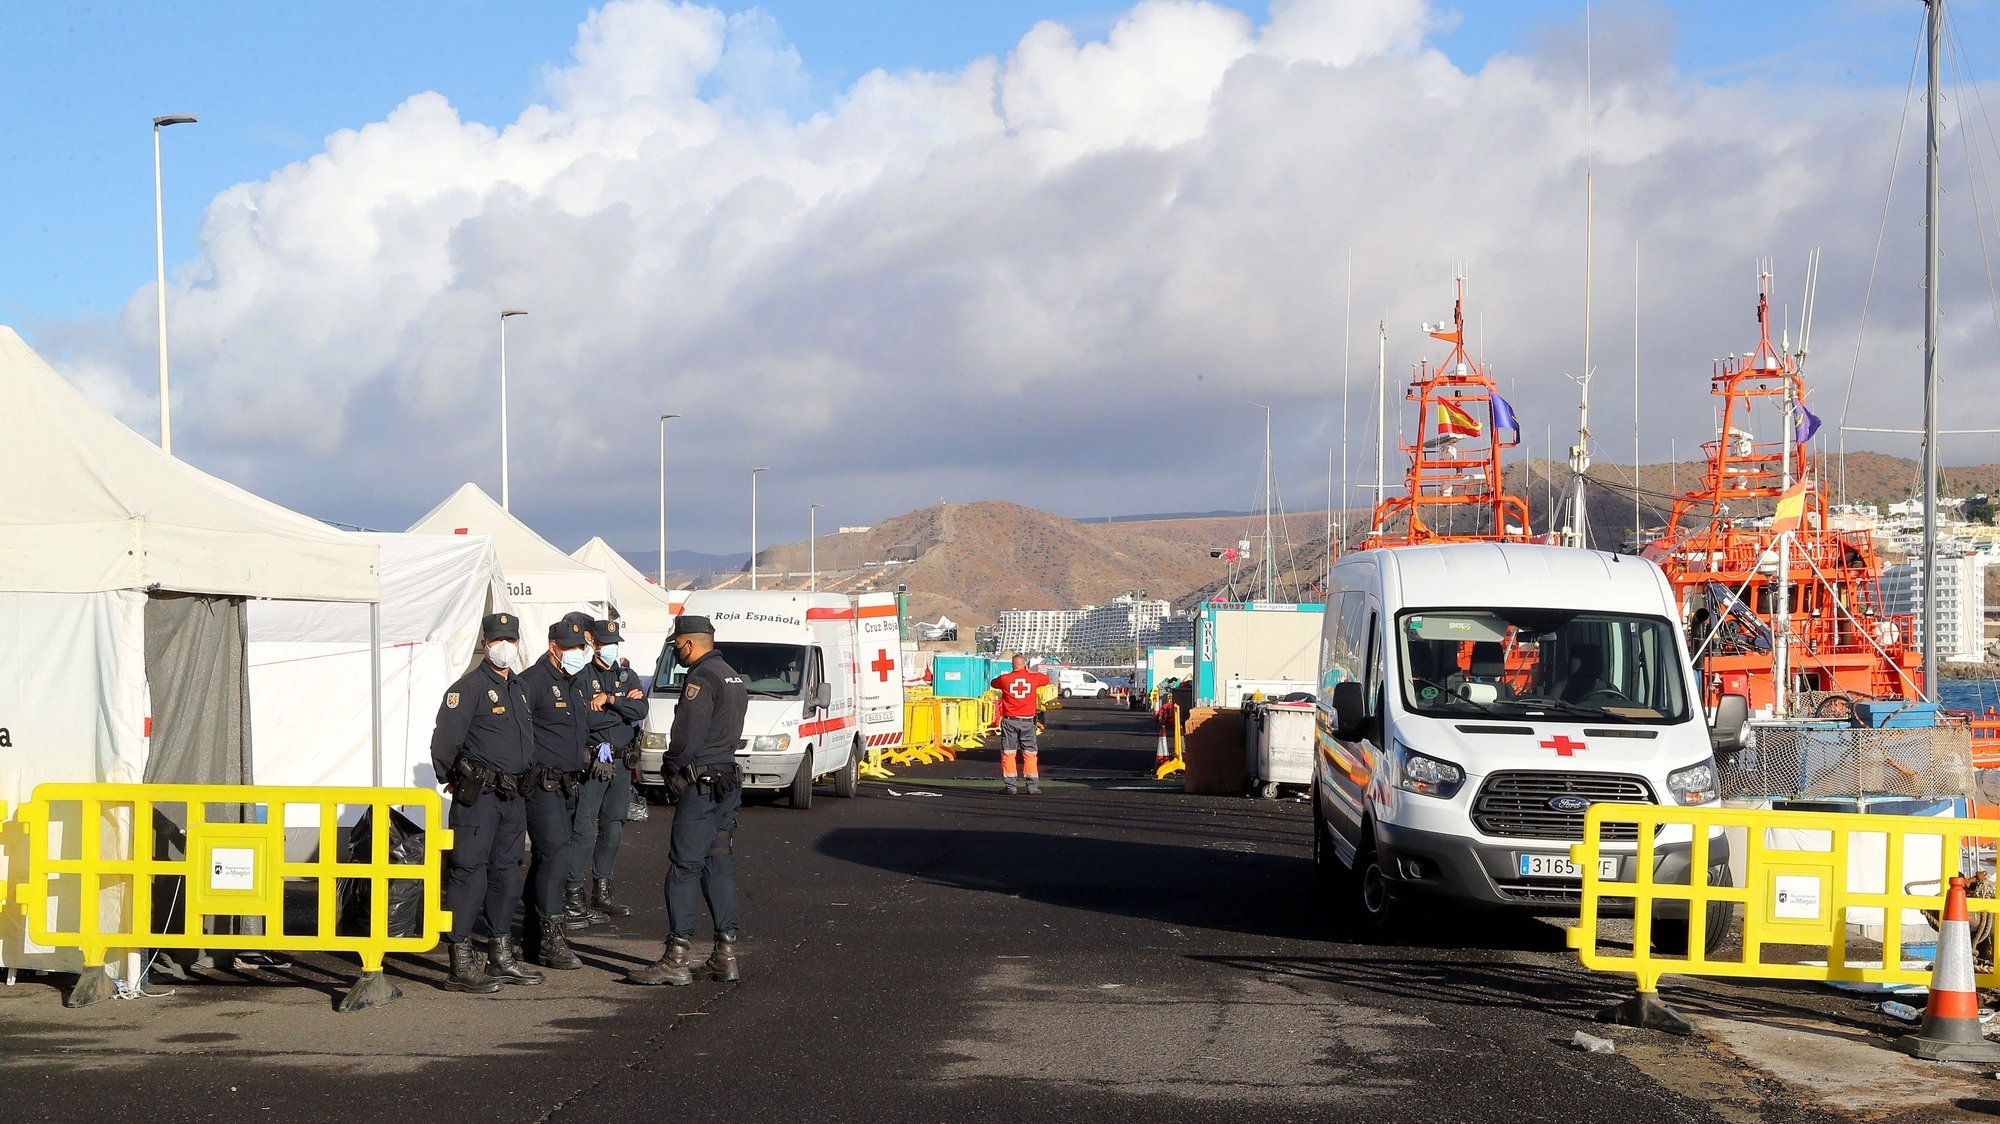 epa08852974 Police officers stand guard as work begins on dismantling the refugee camp in Arguineguin port in Gran Canarias, Spain, 30 November 2020. The migrant camp at its peak housed 2,600 people.  EPA/Elvira Urquijo A.